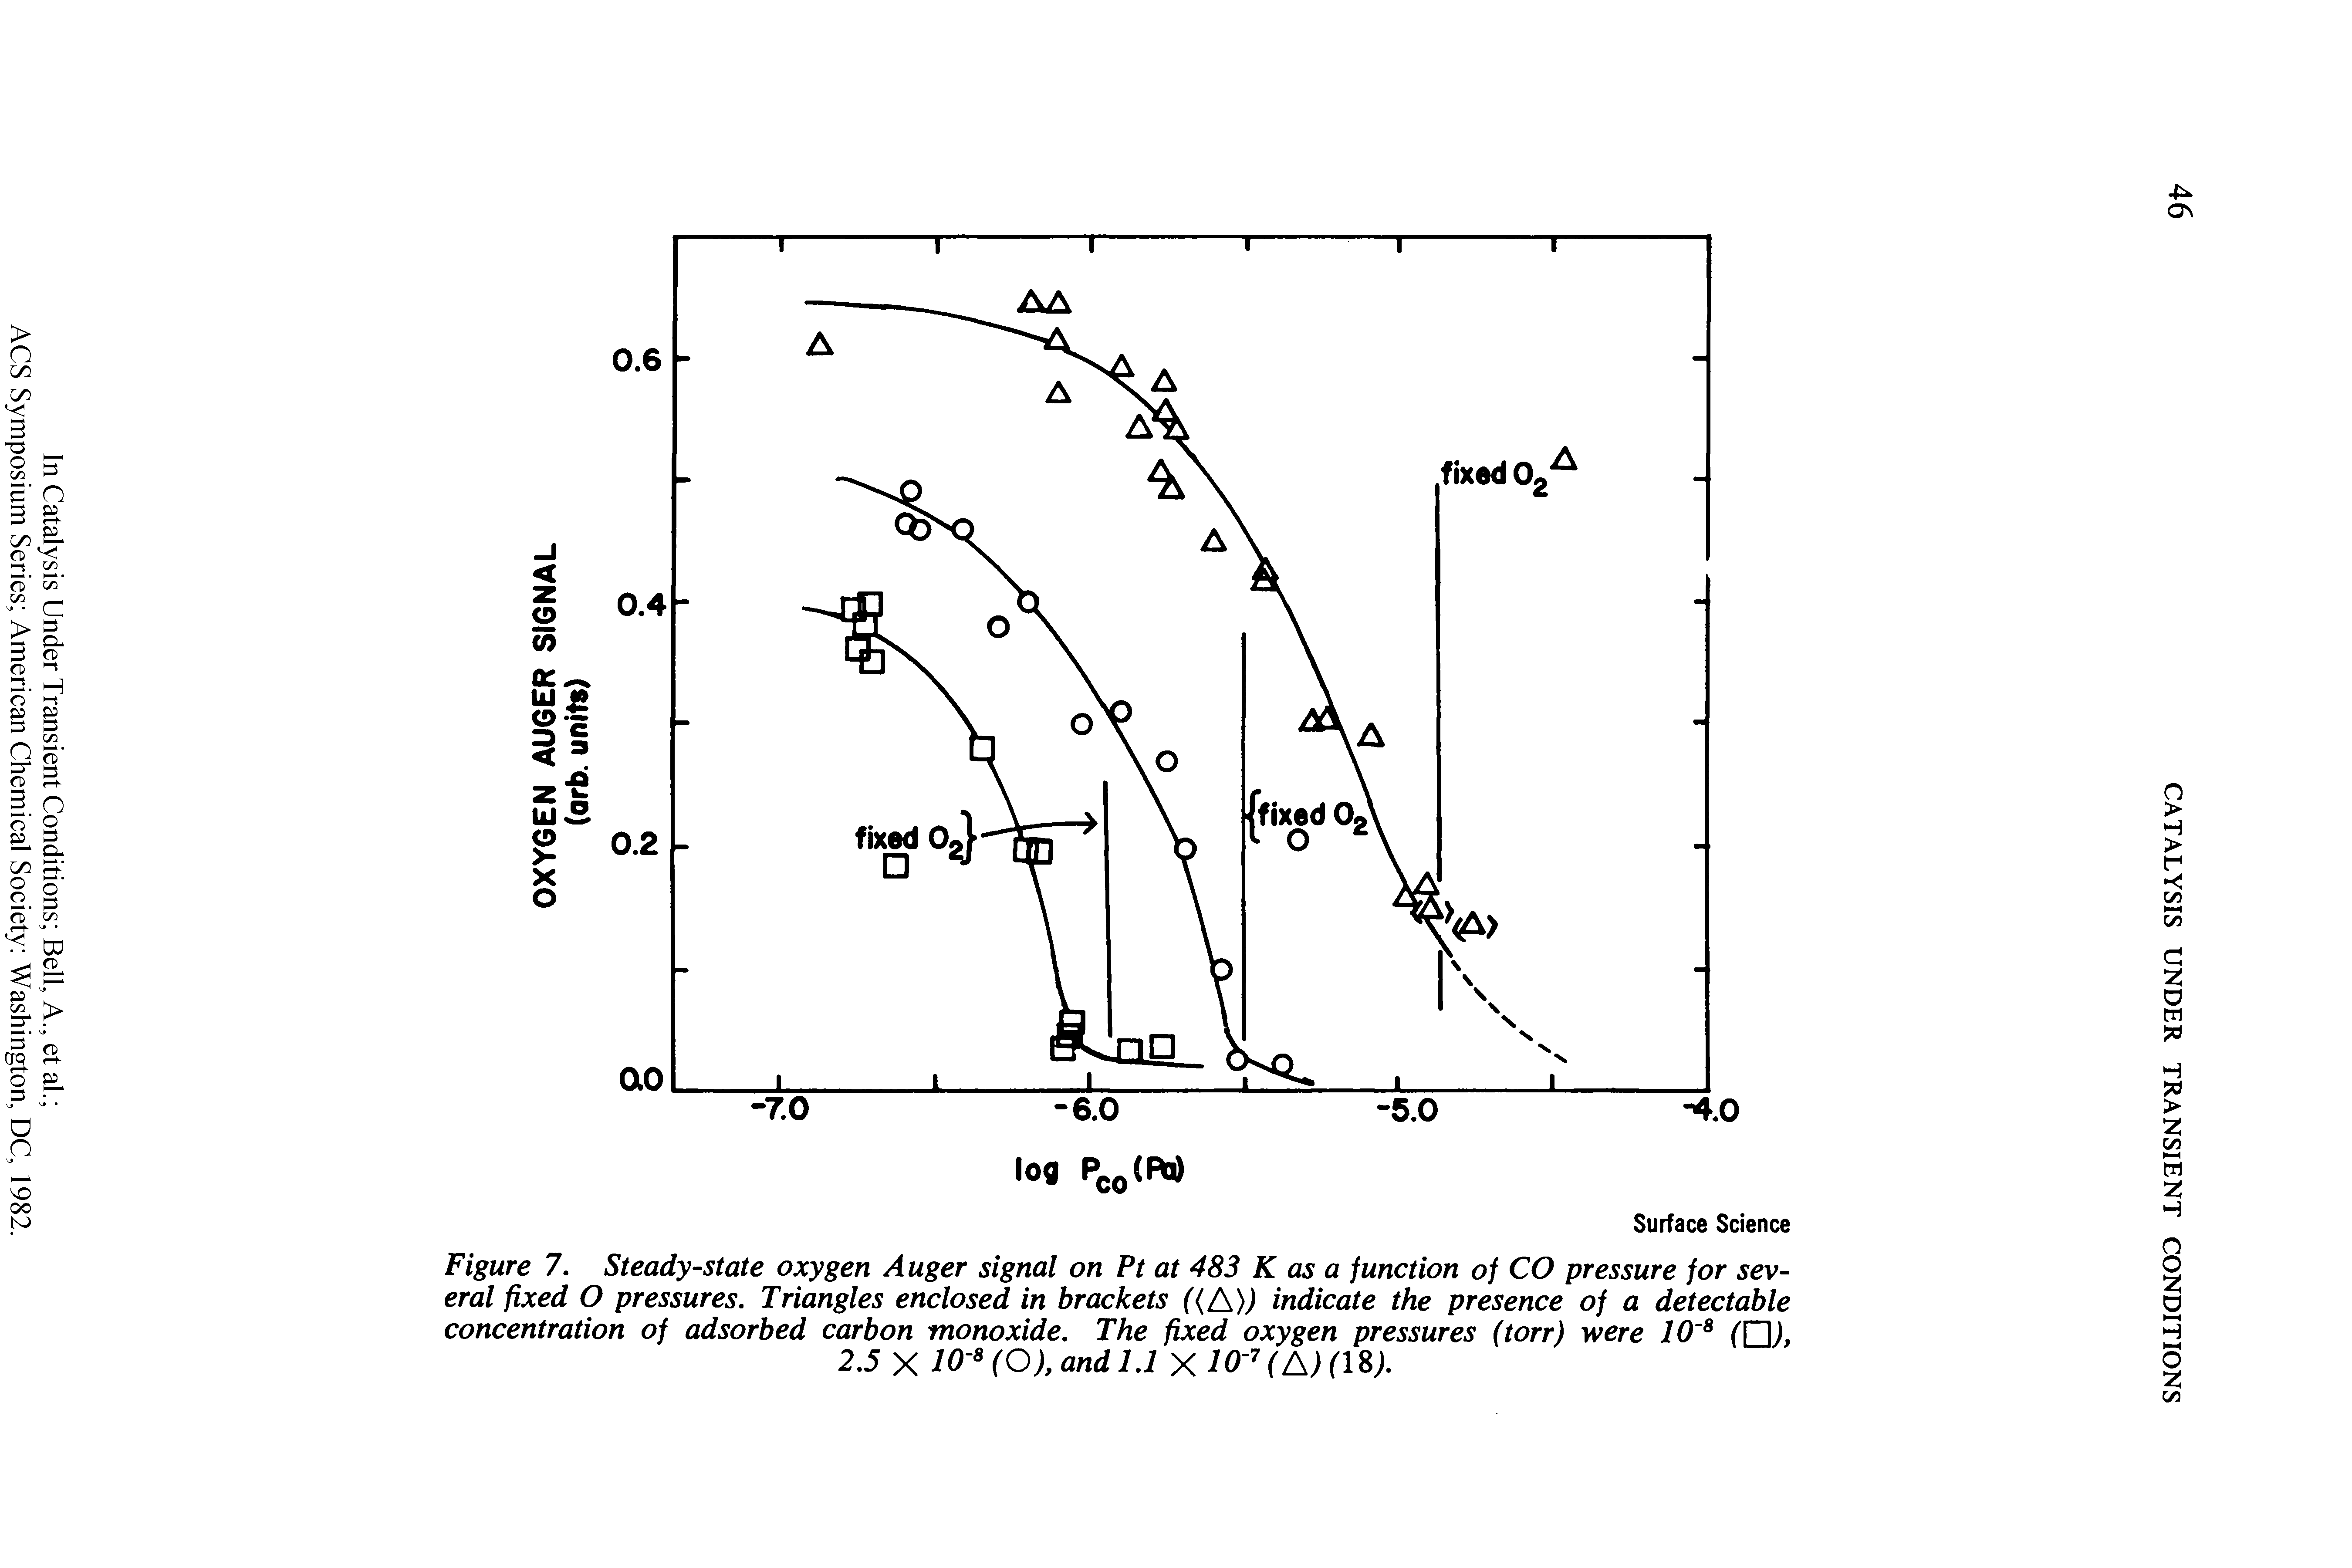 Figure 7. Steady-state oxygen Auger signal on Pt at 483 K as a function of CO pressure for several fixed O pressures. Triangles enclosed in brackets ((A)) indicate the presence of a detectable concentration of adsorbed carbon monoxide. The fixed oxygen pressures (torr) were 10 8 (QJ,...